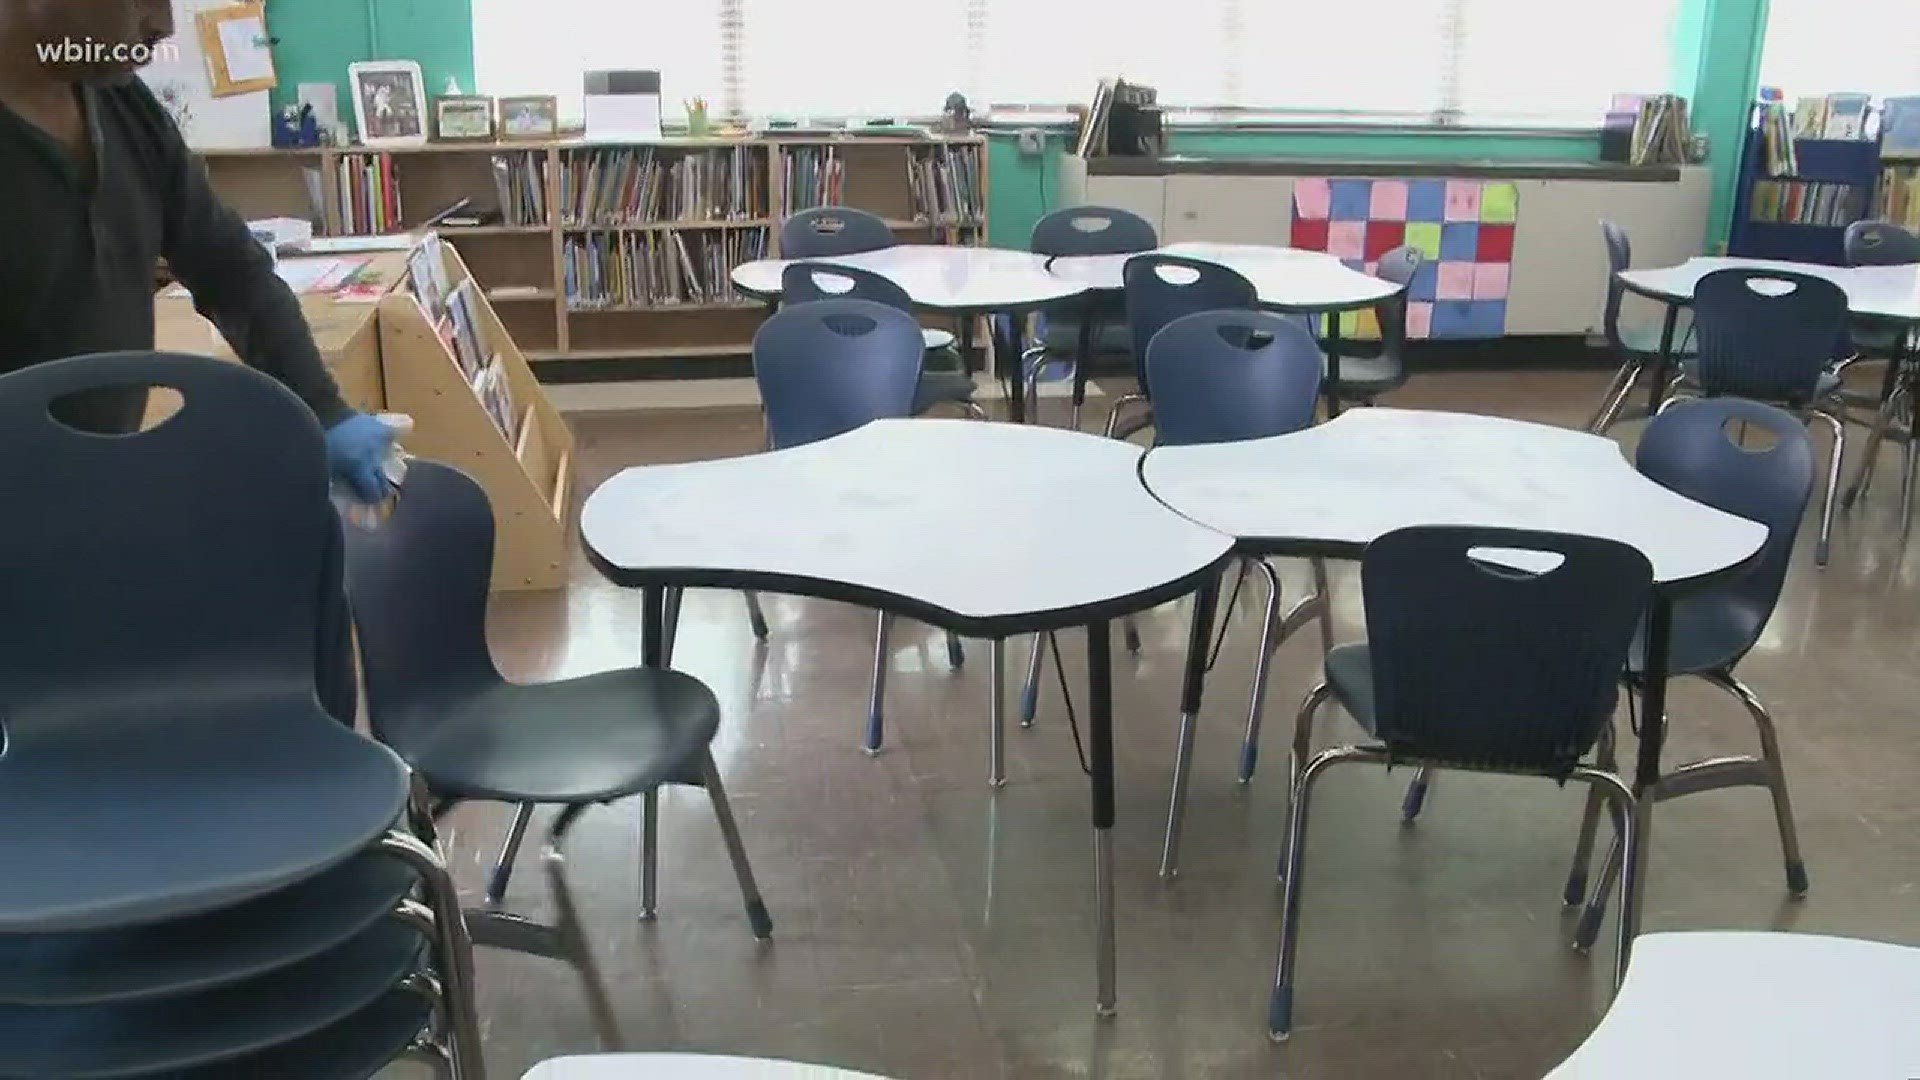 School districts in East Tennessee are cleaning up and disinfecting as a way to prevent sickness from spreading in the schools.